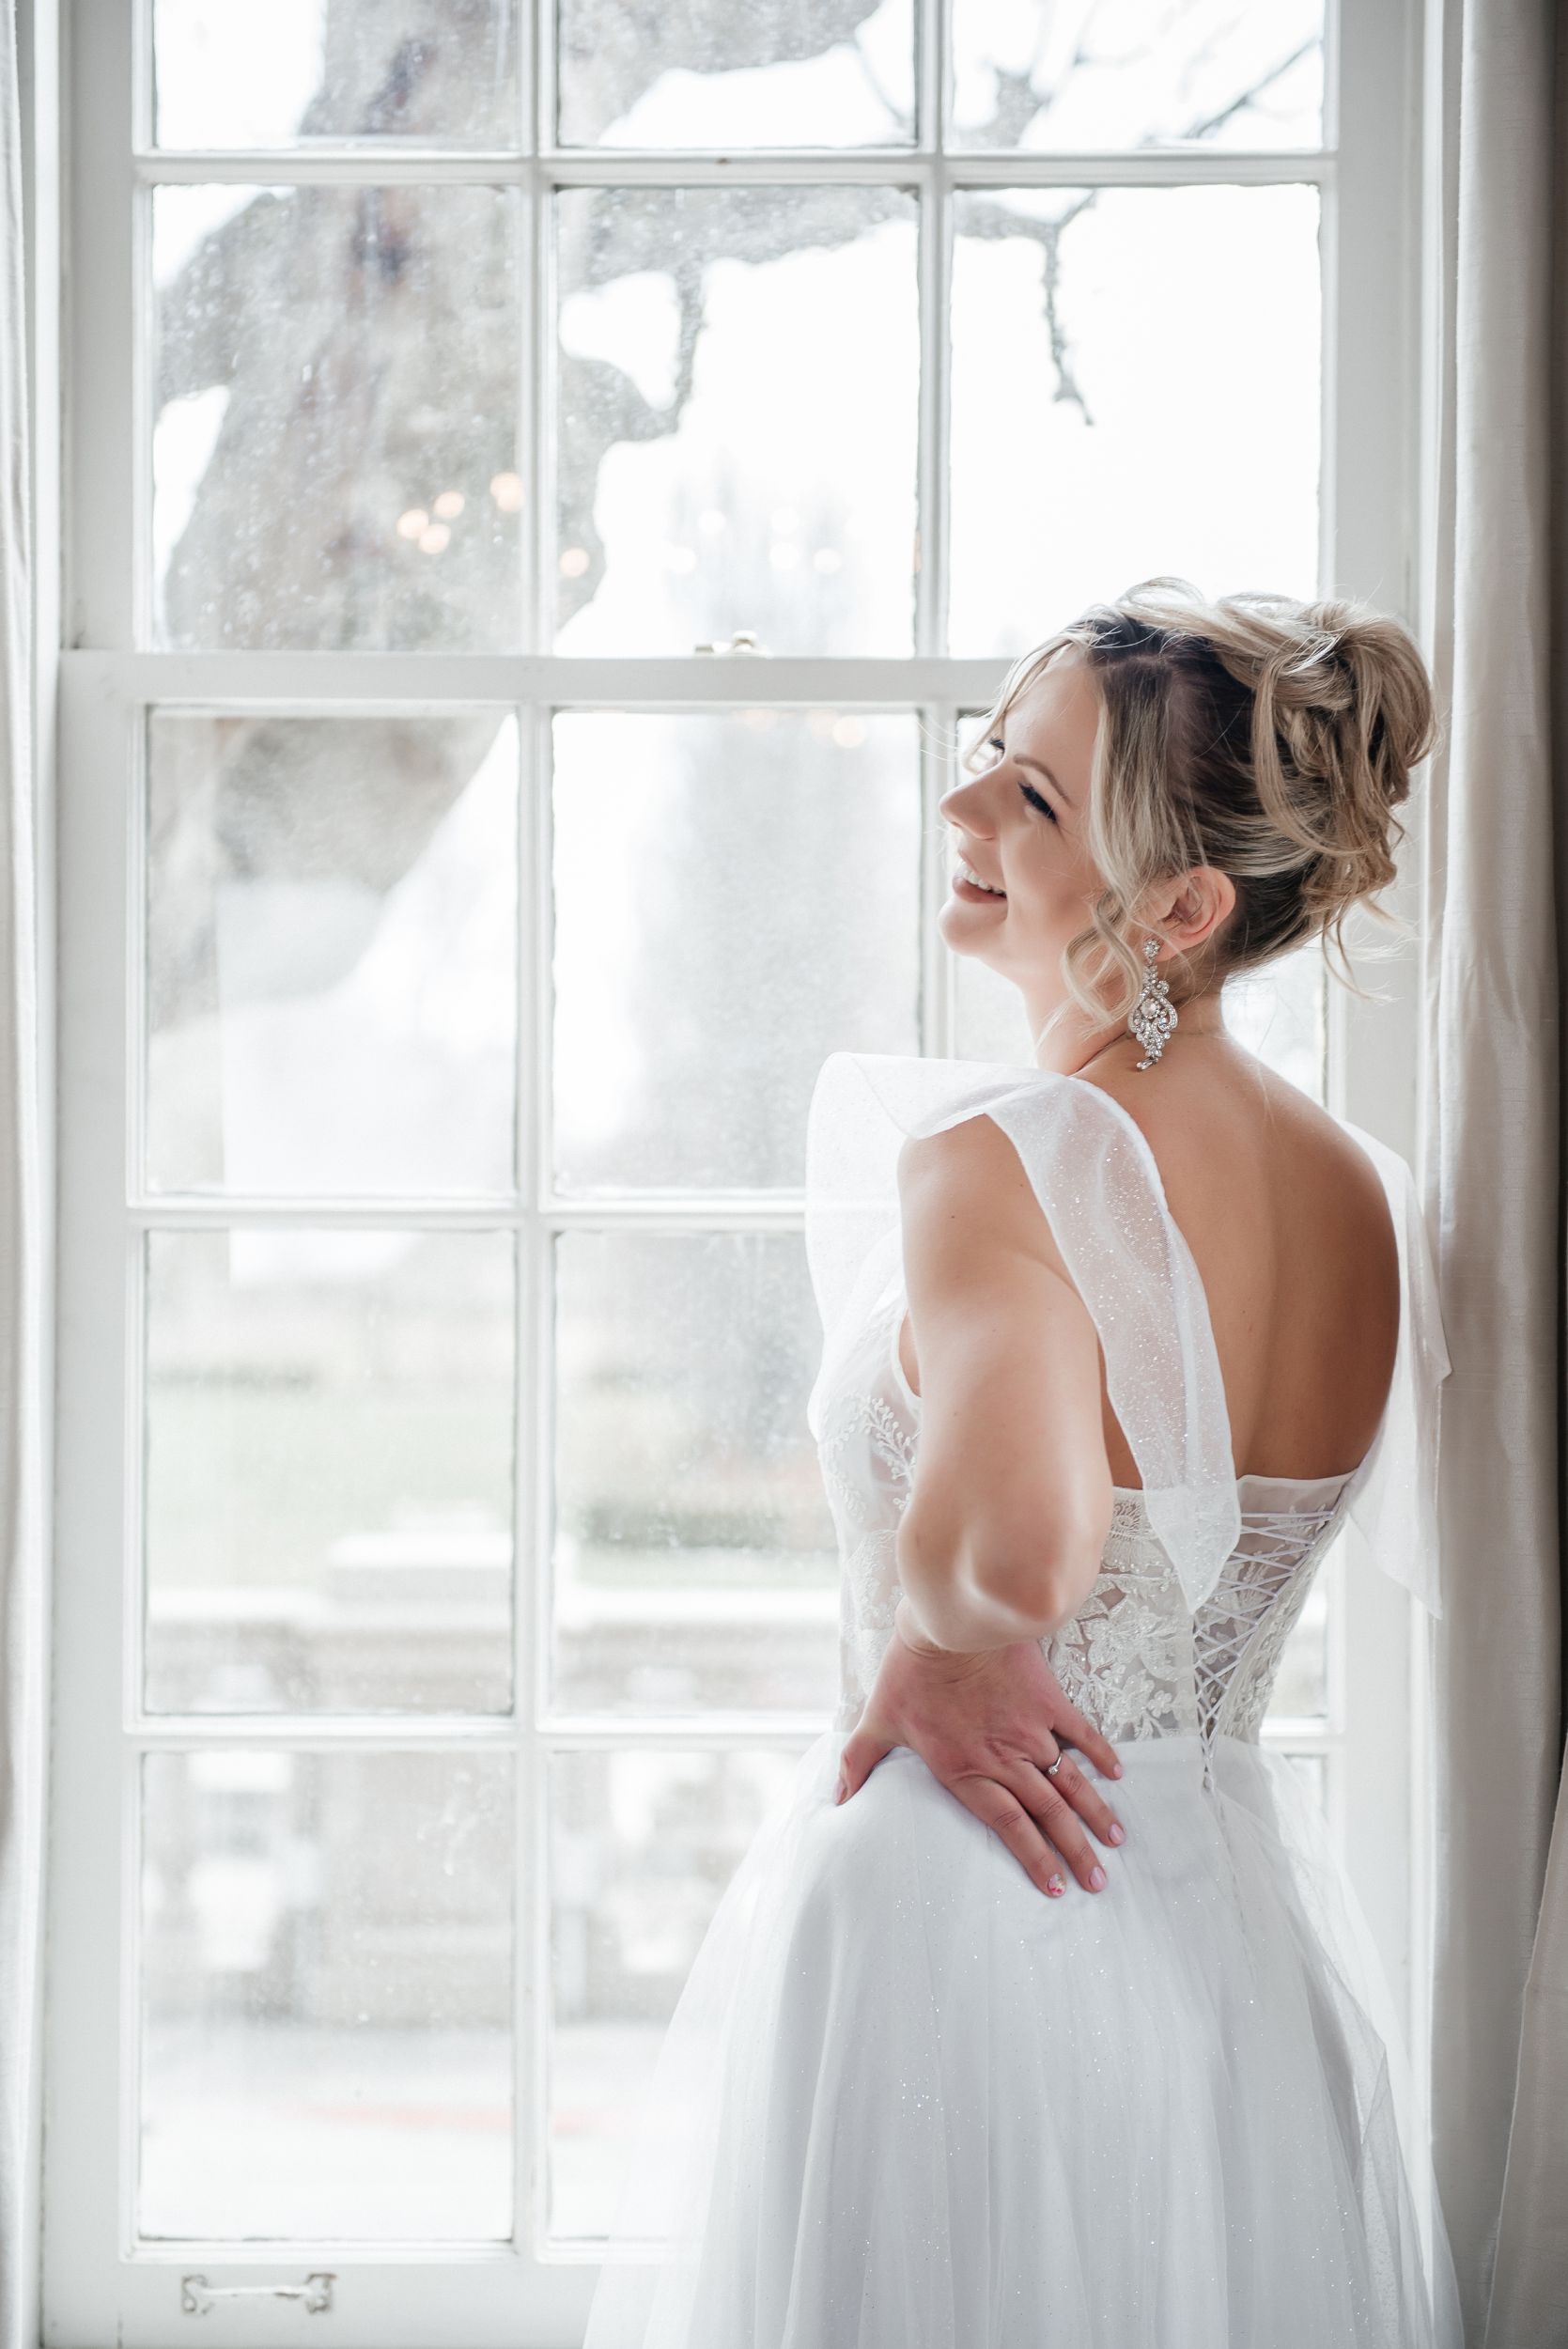 Fairytale boasts an off-shoulder design and sweetheart neckline, accentuated by intricate floral and lovebirds lace appliqués and shimmering sequins on the bodice.